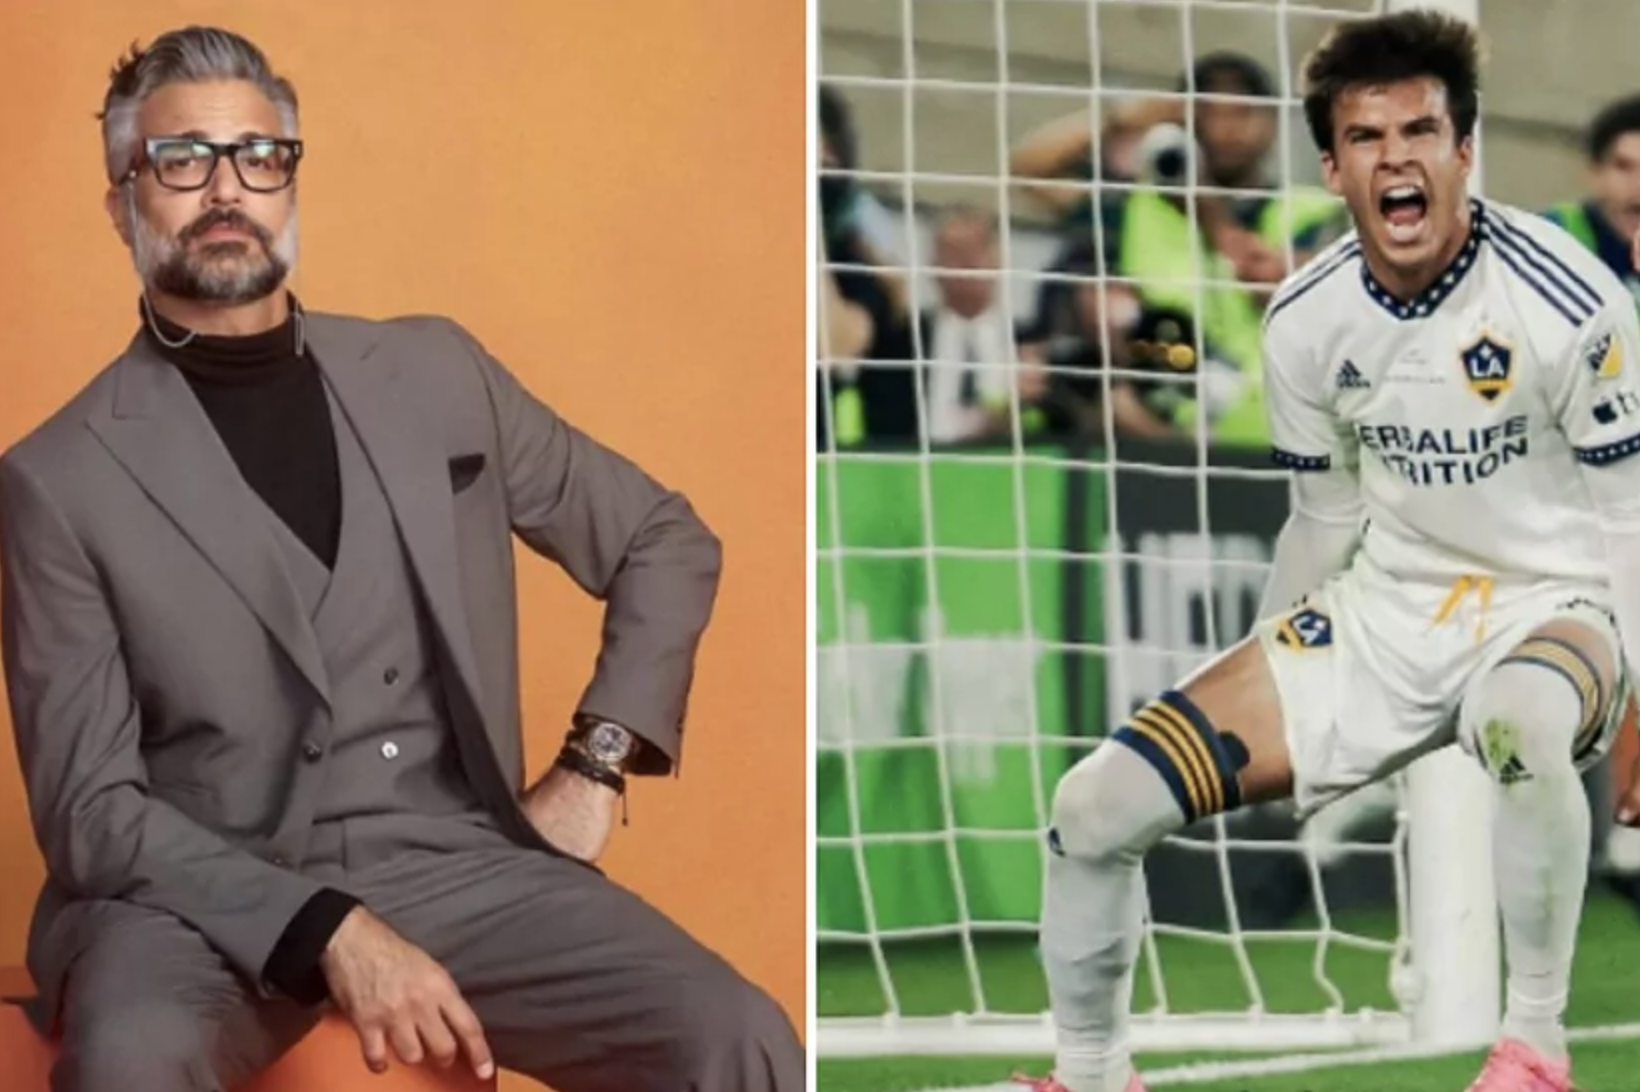 The ongoing feud between Riqui Puig and Jaime Camil: Look kid